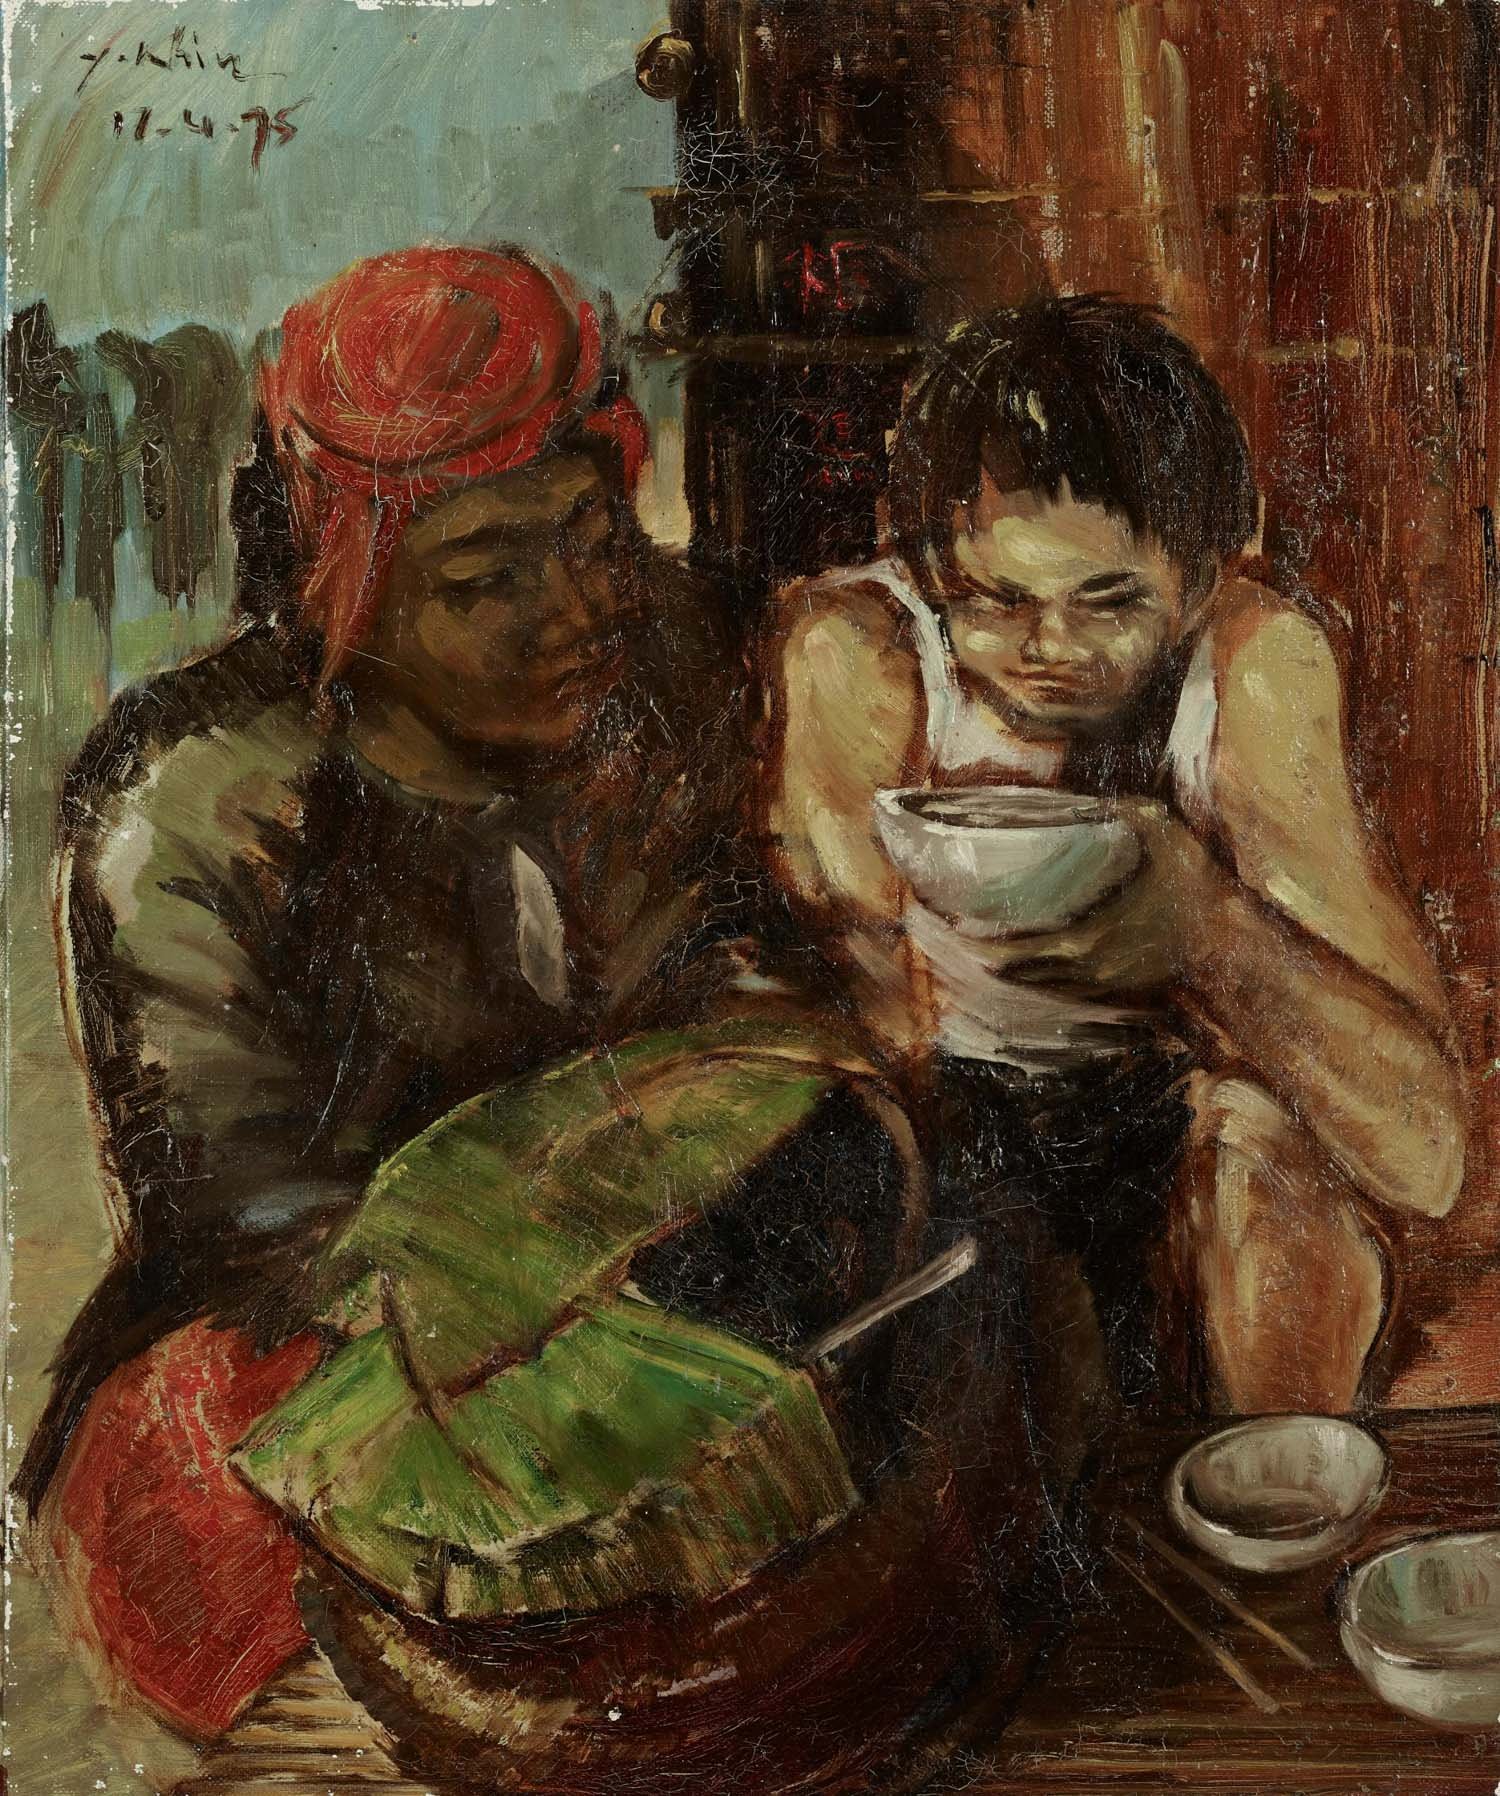  You Khin, ‘Untitled (The Chinese Man Eats The Cambodian Soup)’, 1975, oil on canvas, 46 x 38cm. Collection of National Gallery Singapore. 